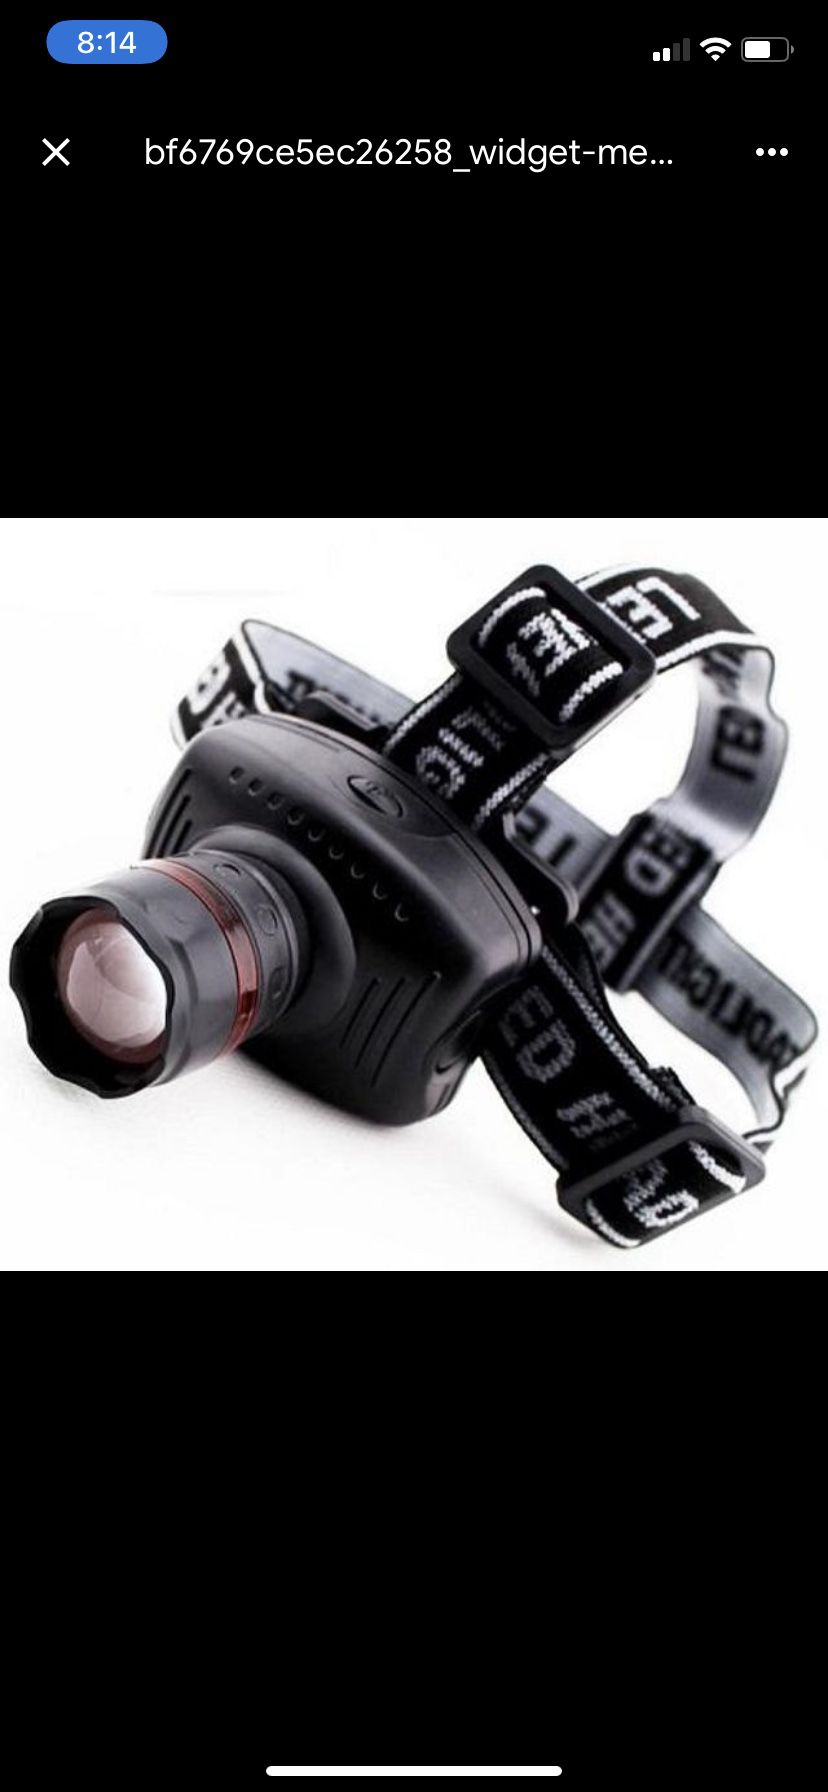 Headlamp used during dark for Walking, Tracking, Hunting, Cycling 